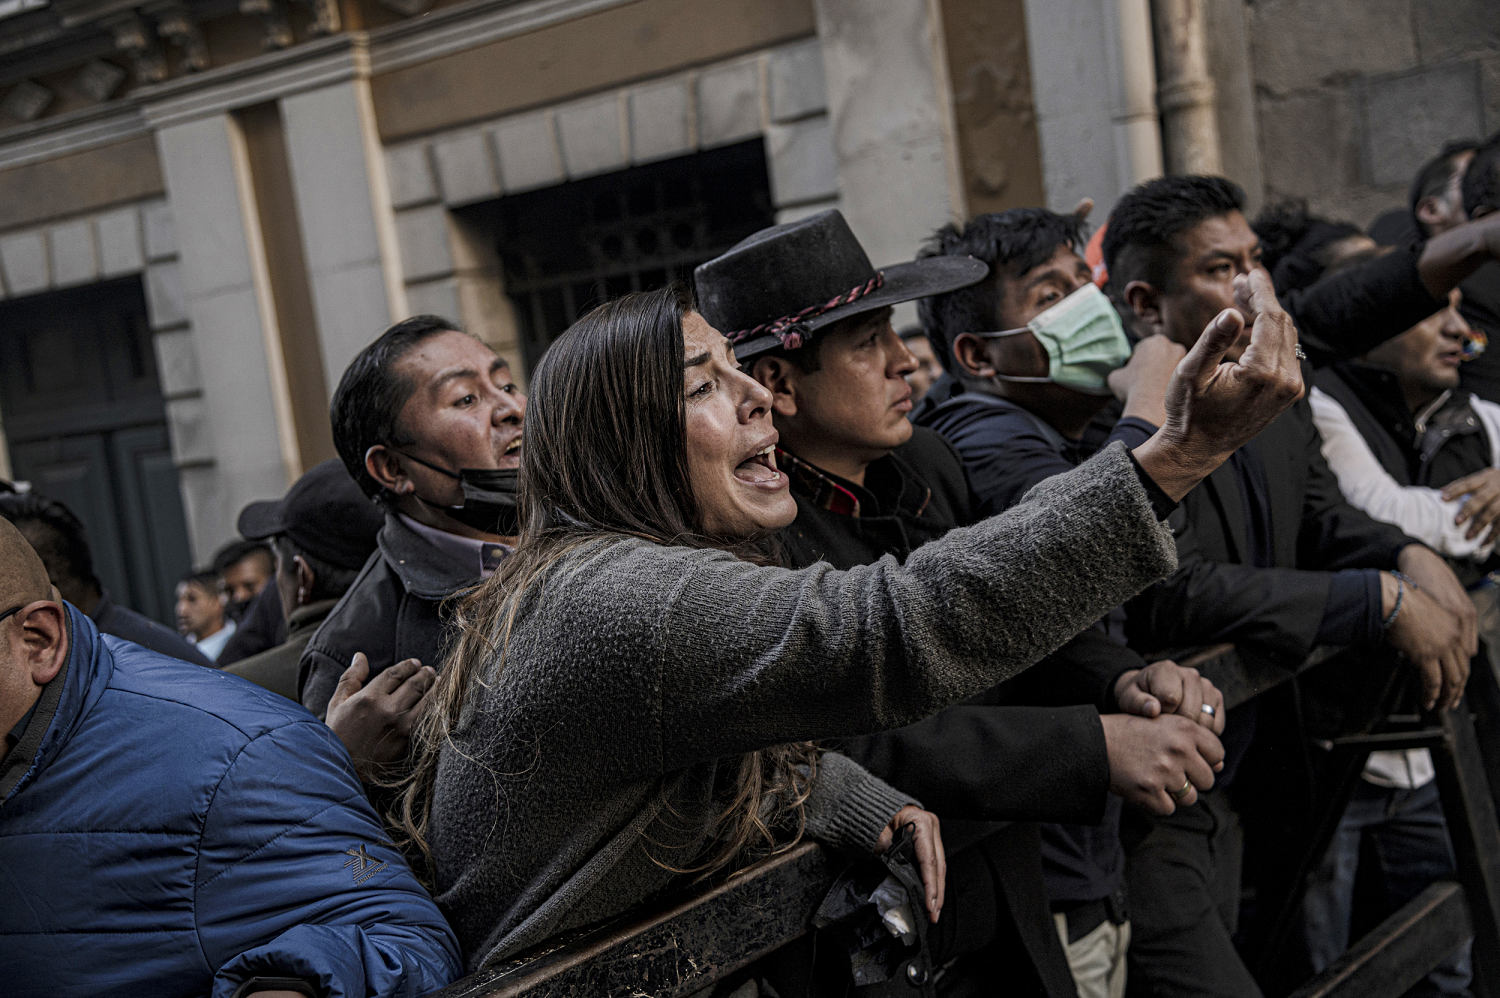 Bolivia's attempted coup, dueling versions of events raise worries over what comes next